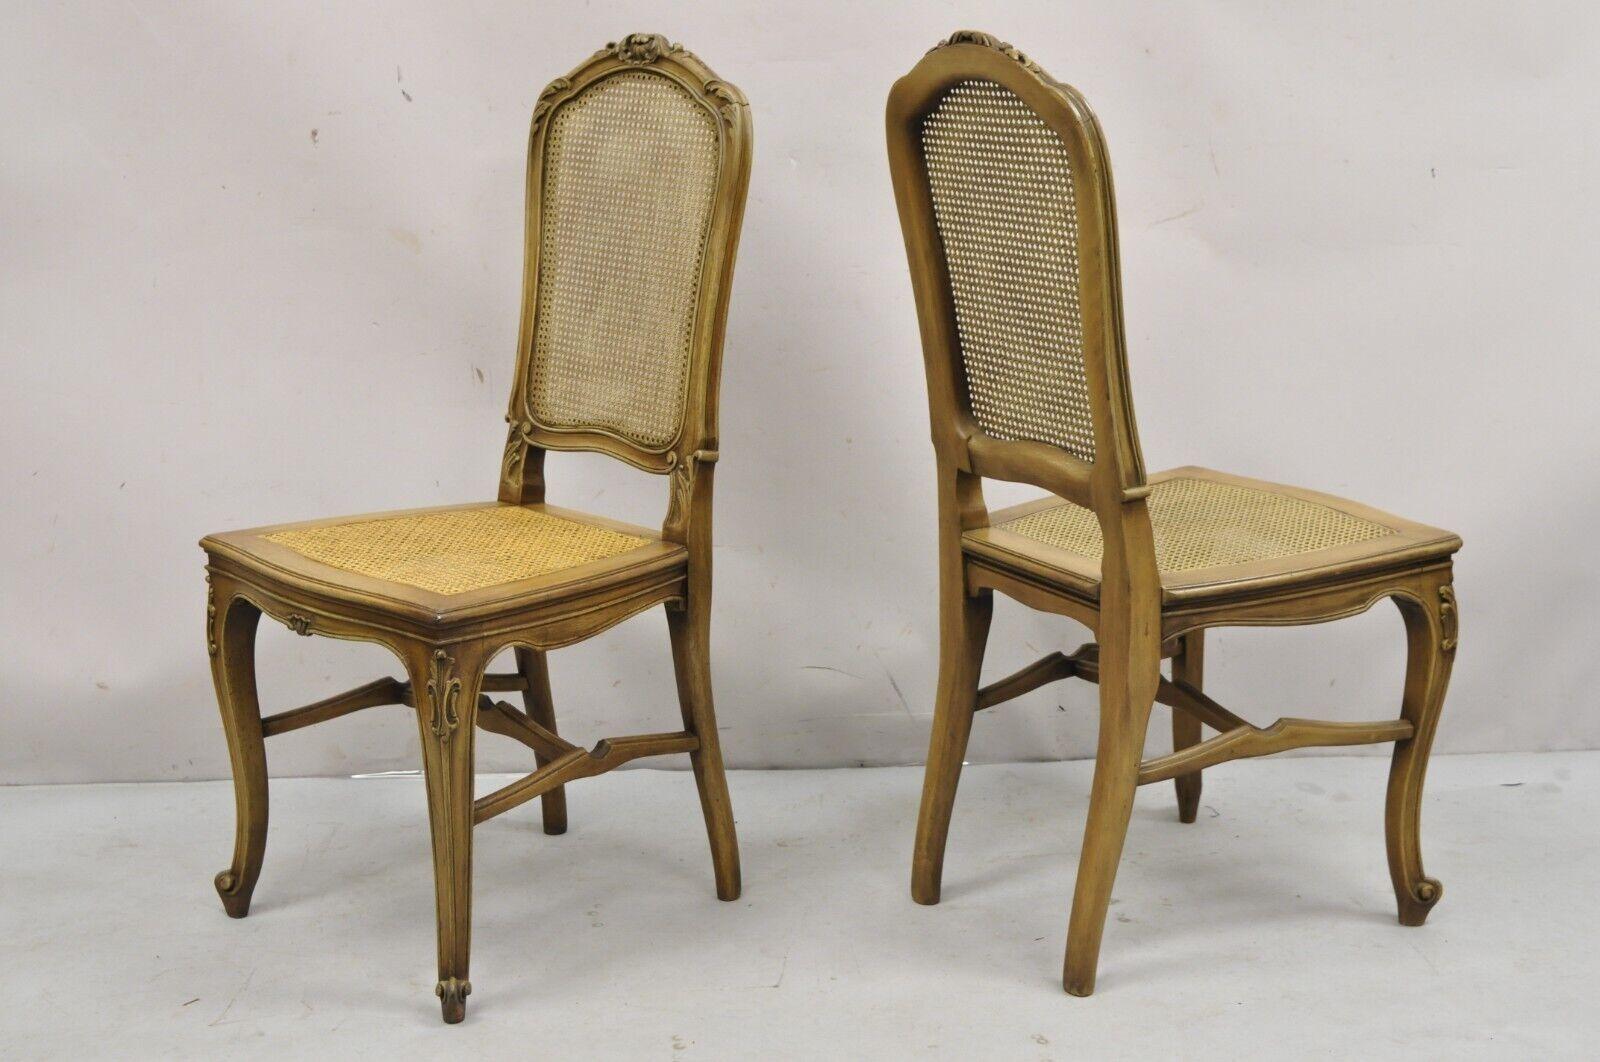 Caning Antique French Provincial Louis XV Style Carved Walnut Cane Dining Chair - Pair For Sale